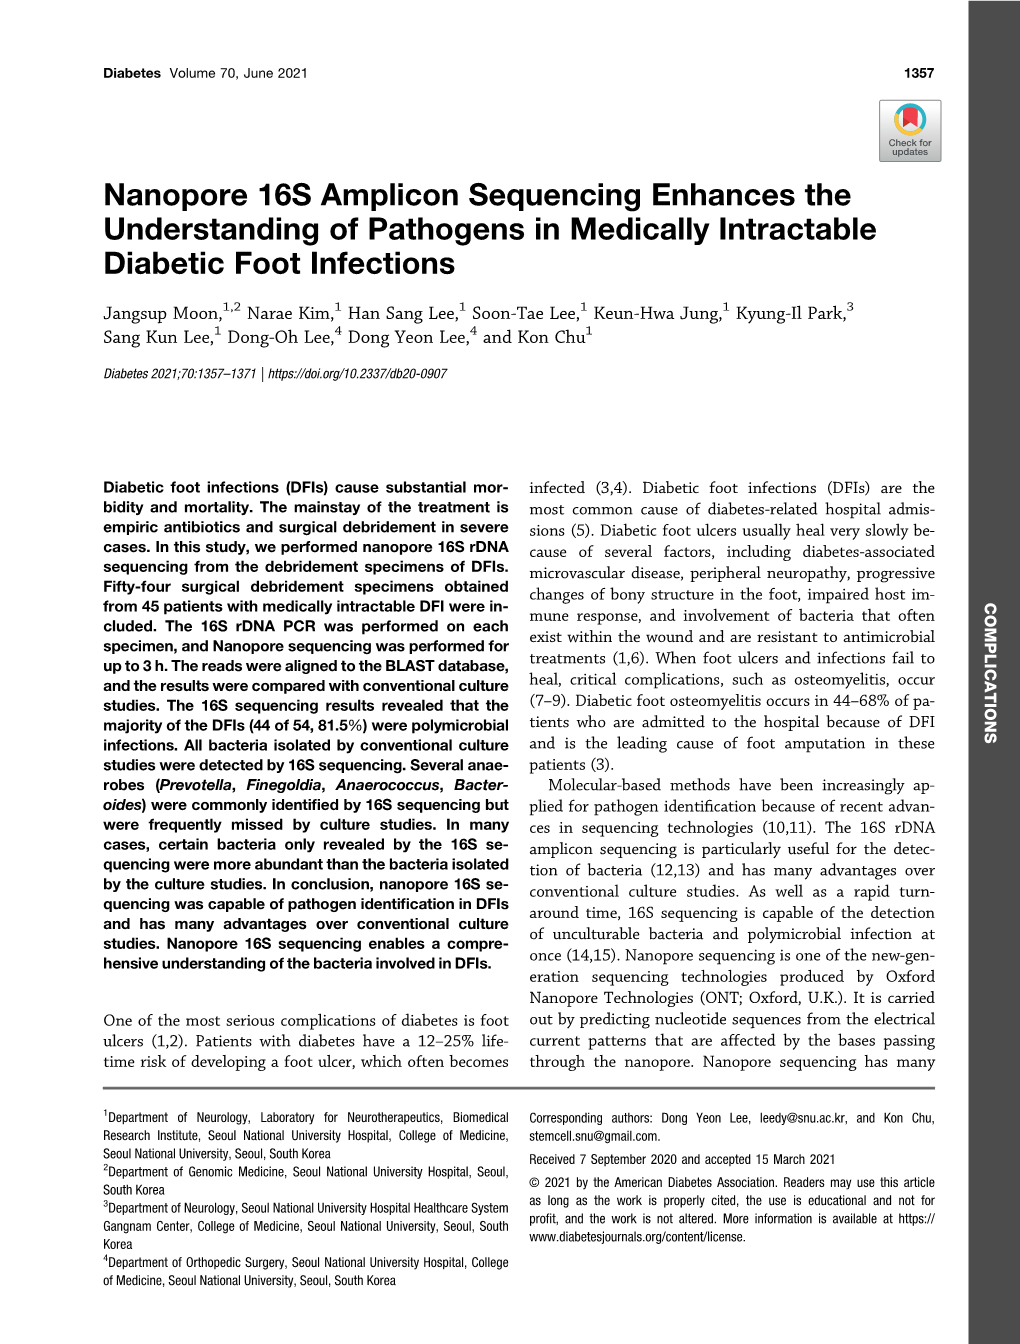 Nanopore 16S Amplicon Sequencing Enhances the Understanding of Pathogens in Medically Intractable Diabetic Foot Infections